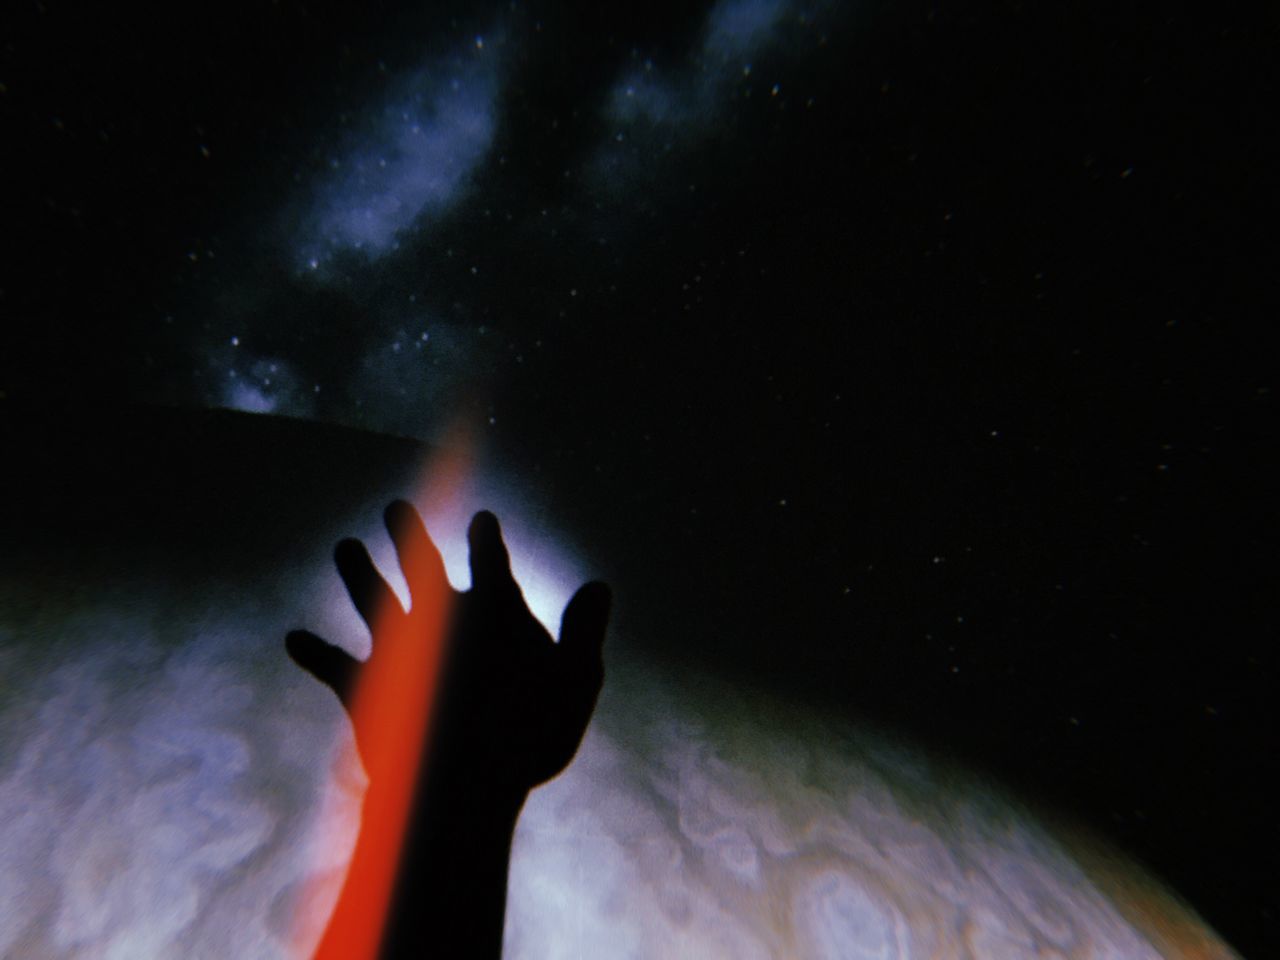 real people, human hand, one person, human body part, hand, unrecognizable person, night, lifestyles, star - space, personal perspective, leisure activity, body part, indoors, silhouette, nature, space, human finger, finger, illuminated, dark, nightlife